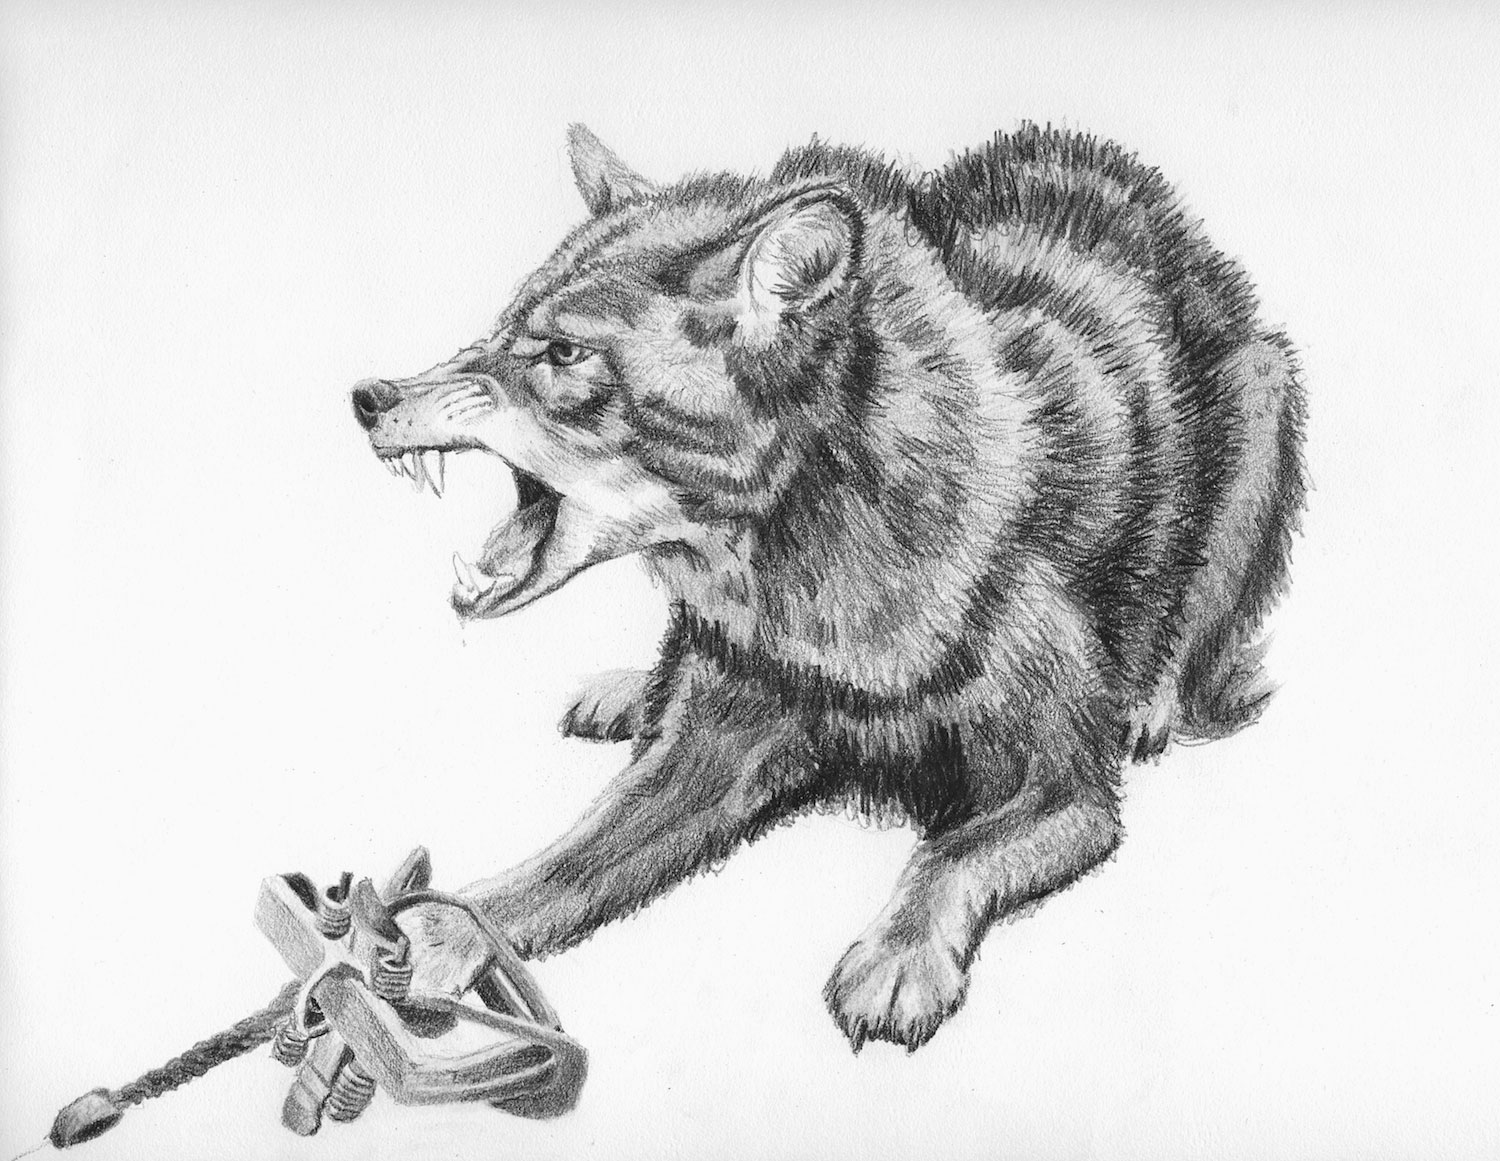 Jackie Skrzynski, Trapped Coyote, Snarling, 2013. Pencil, 9x12.5 in.